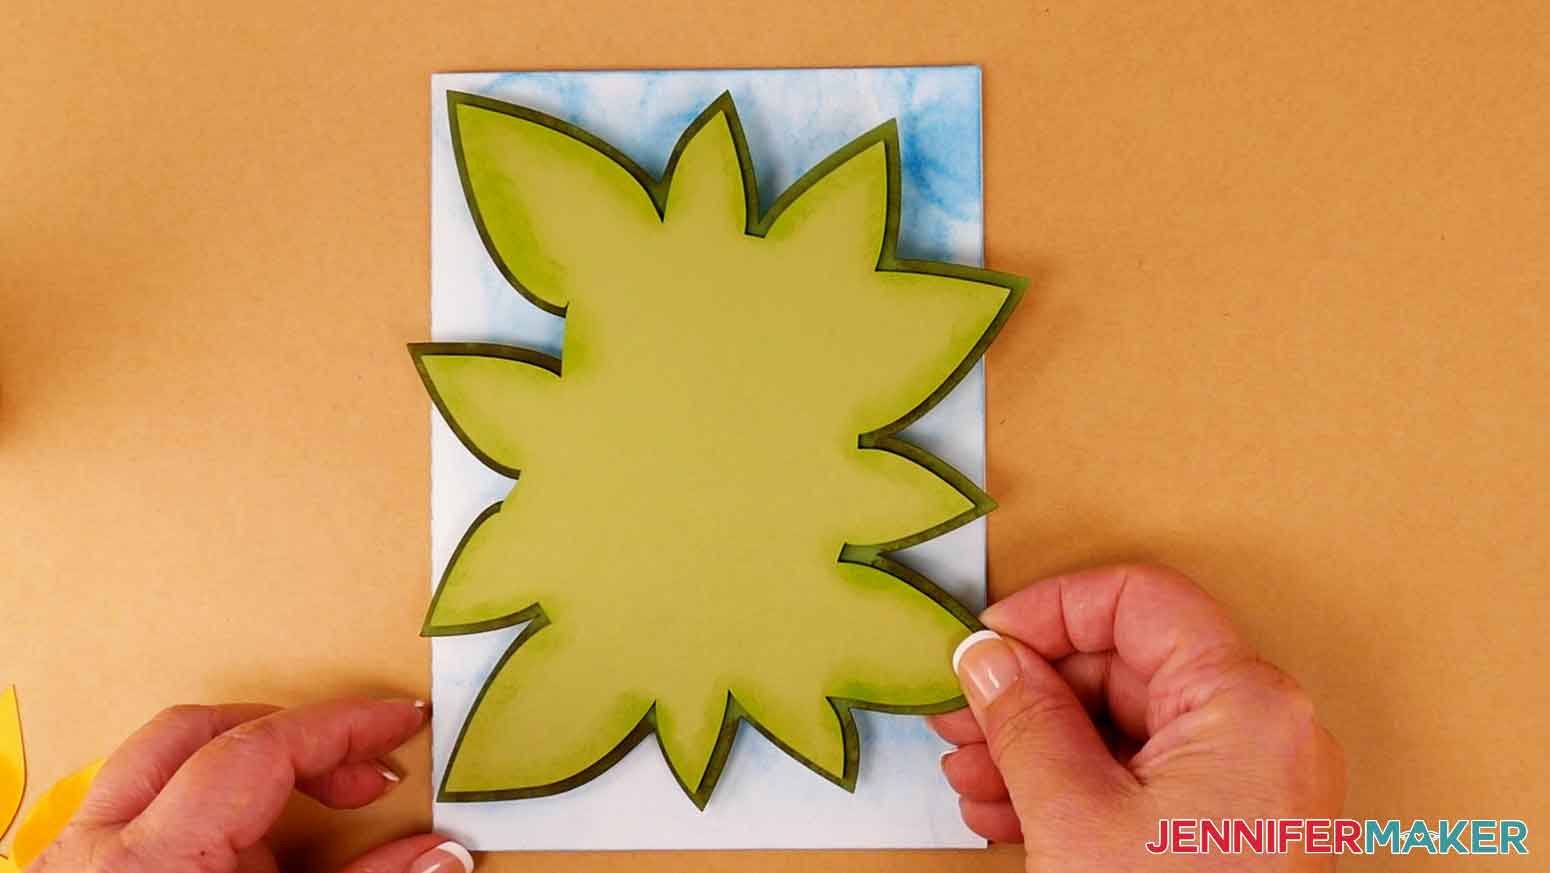 Place the leaf layers on the sky layer with a slight overhang of leaves around the card.